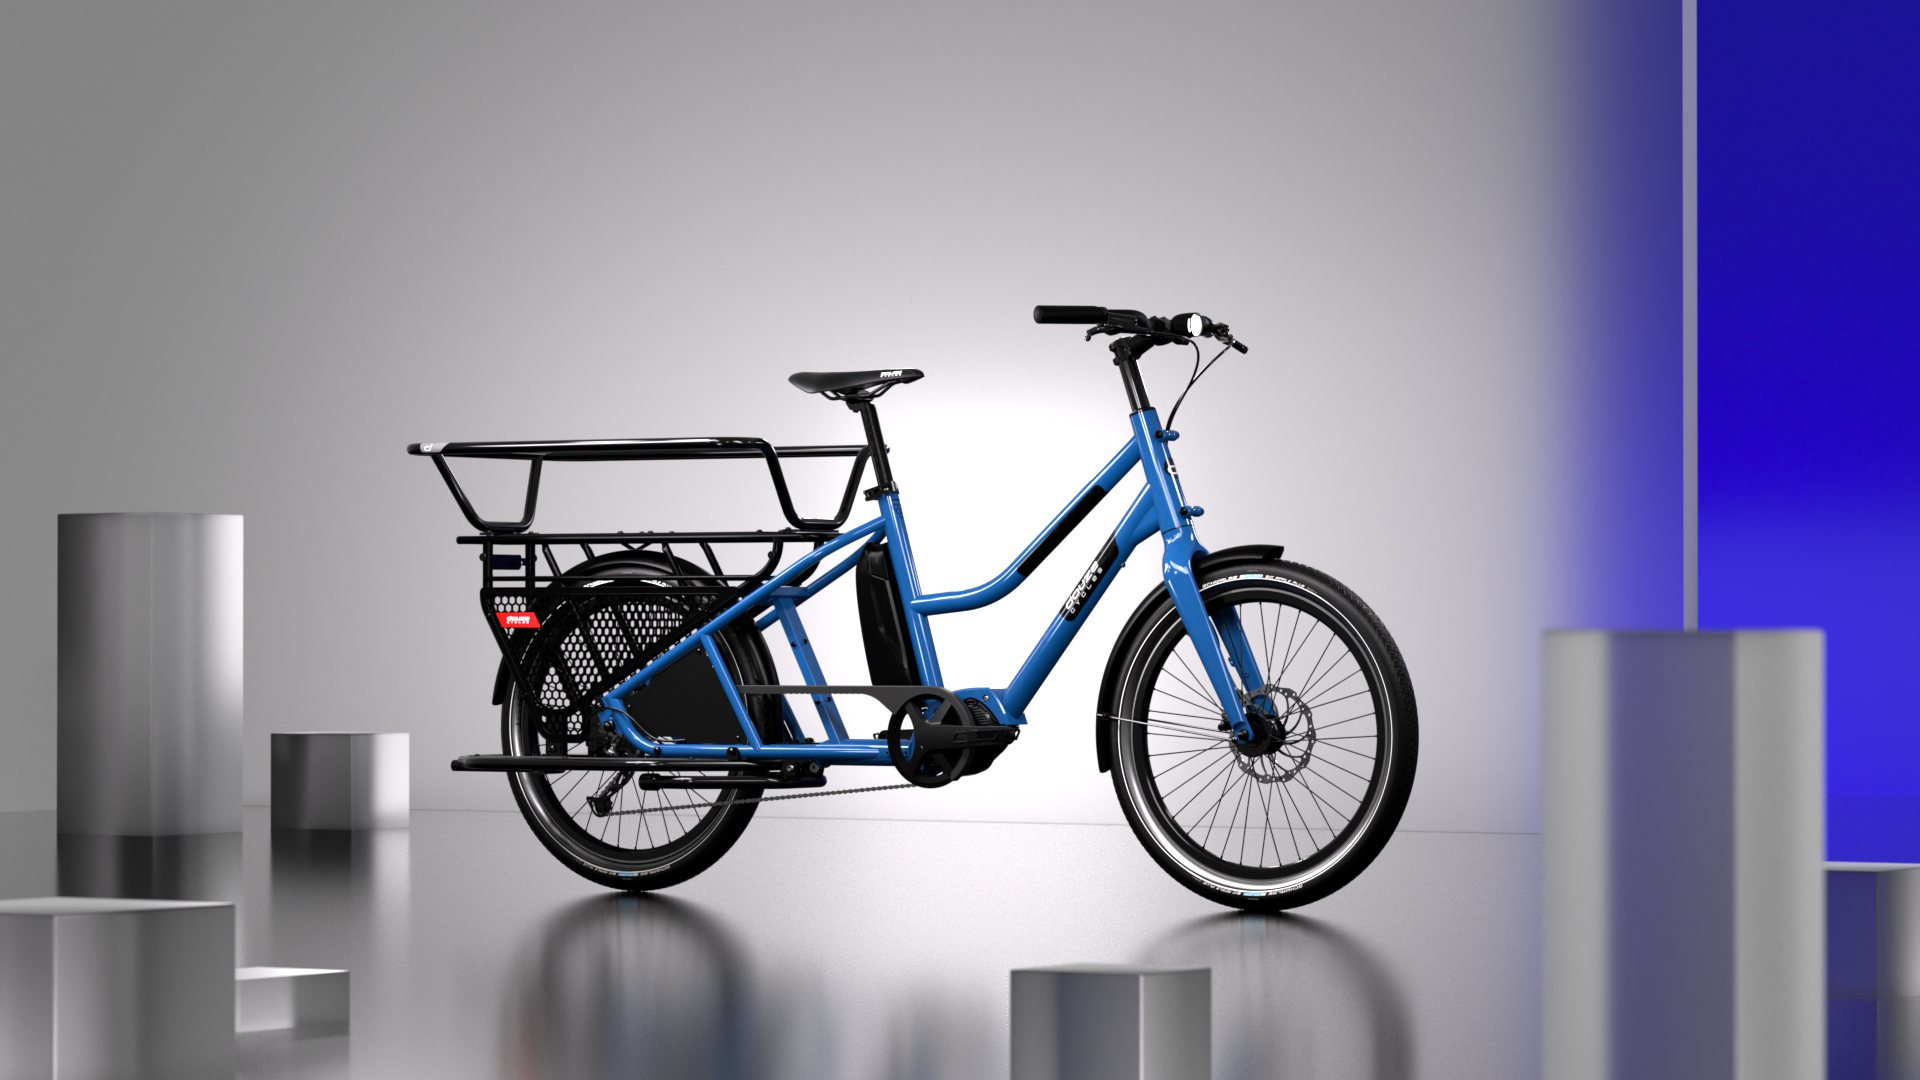 1667898683 664 Douze Cycles a key player in the cargo bike landscape